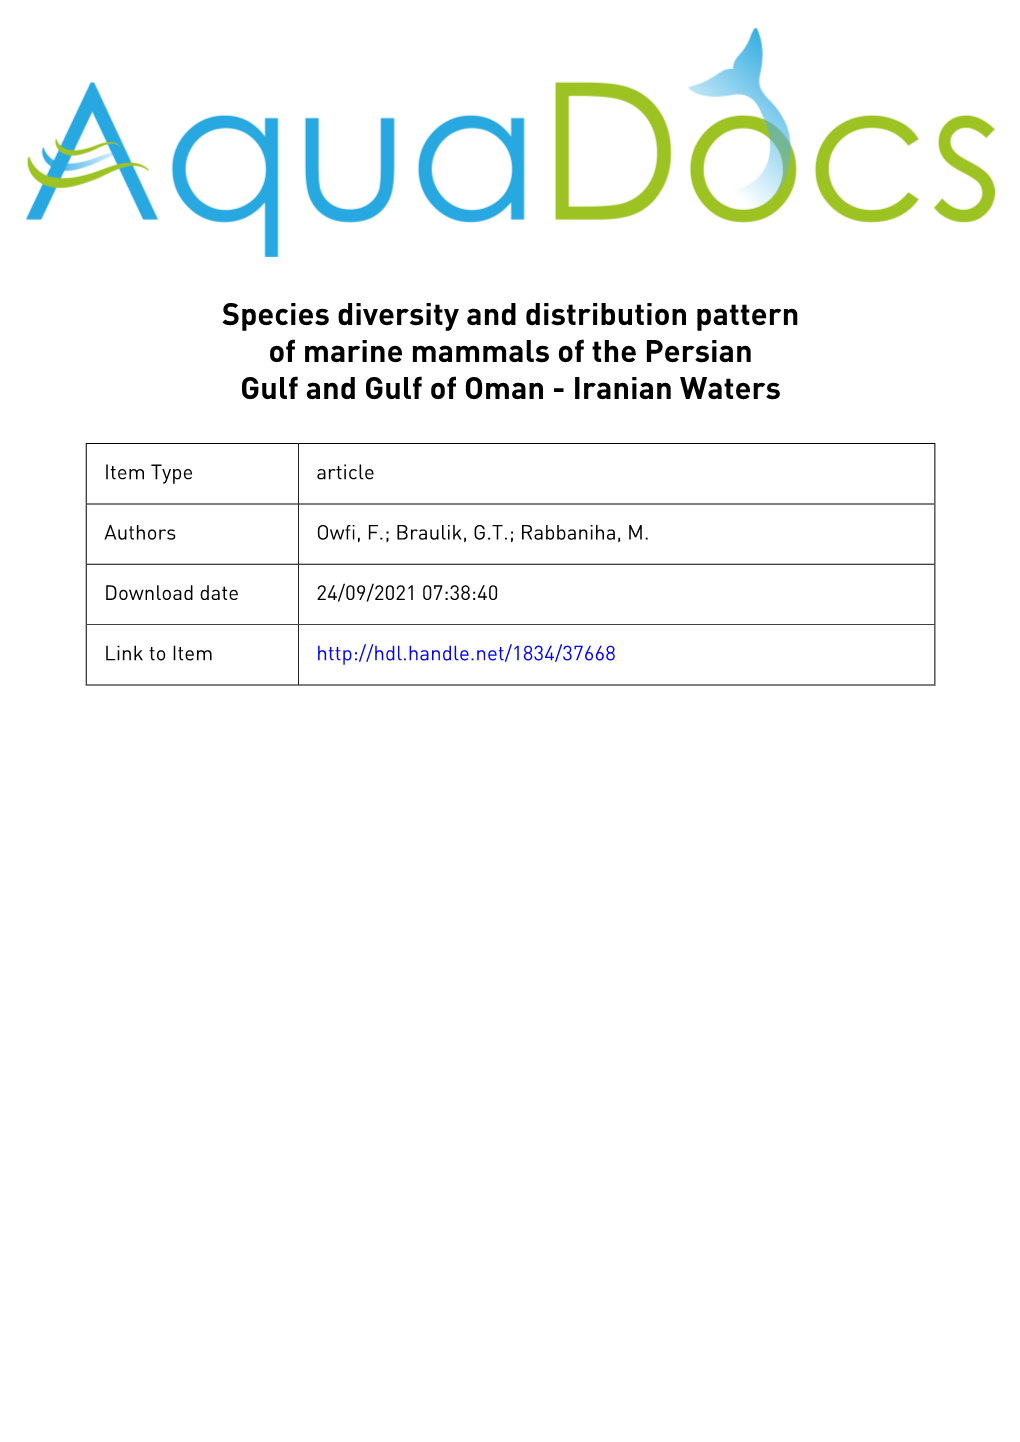 Species Diversity and Distribution Pattern of Marine Mammals of the Persian Gulf and Gulf of Oman - Iranian Waters